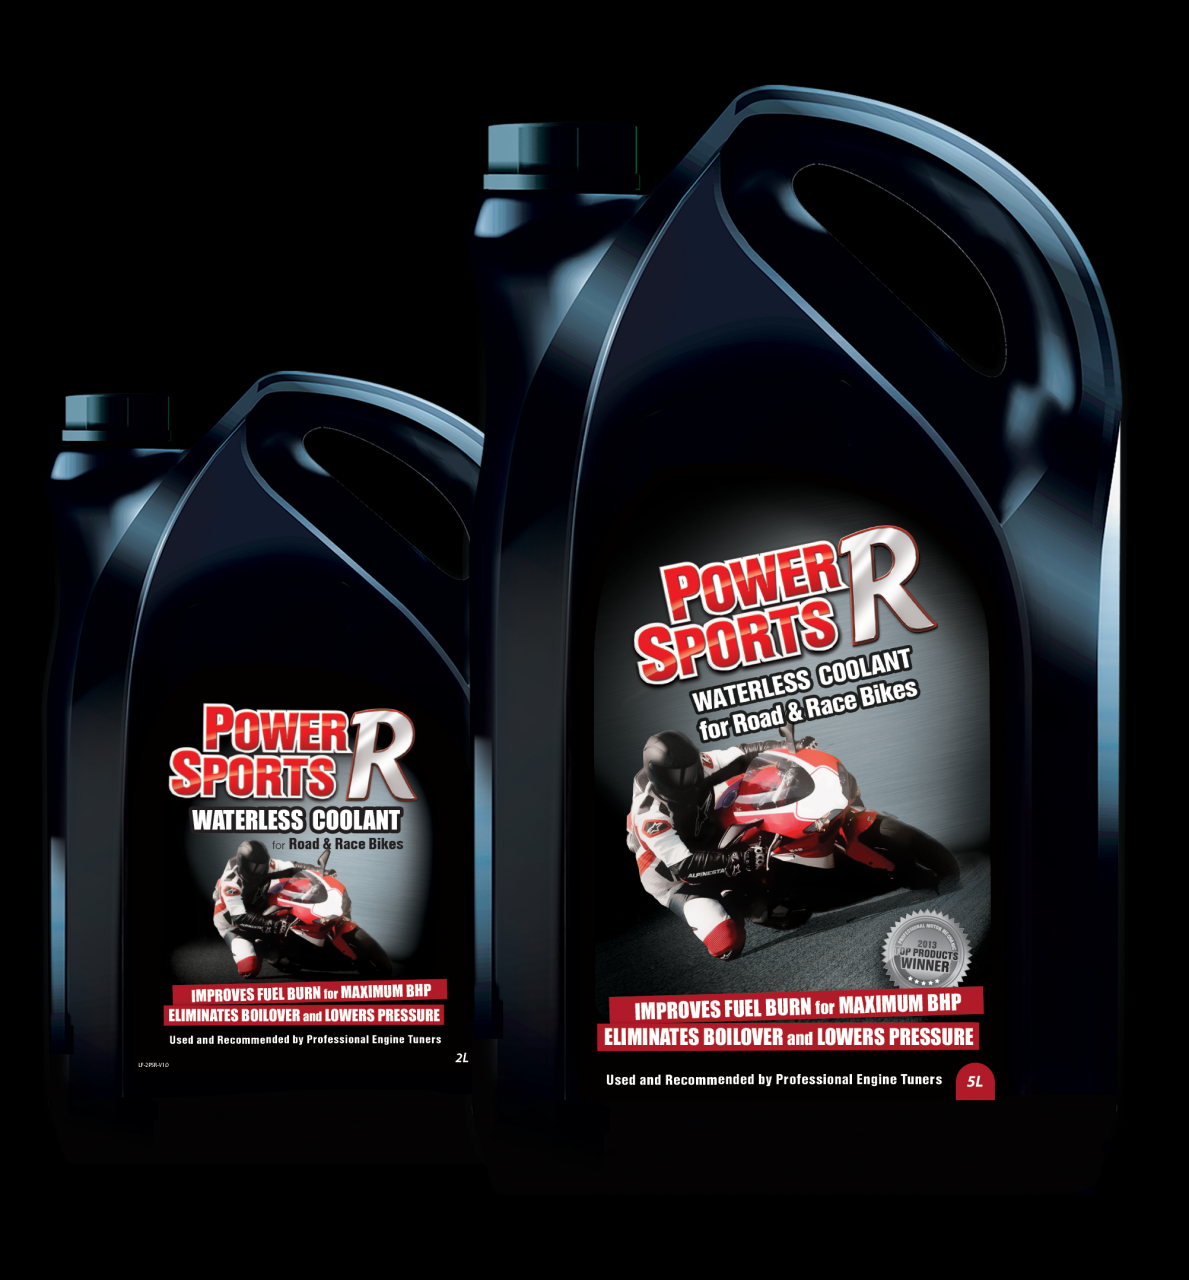 Evans Waterless Coolant for Bike Engines